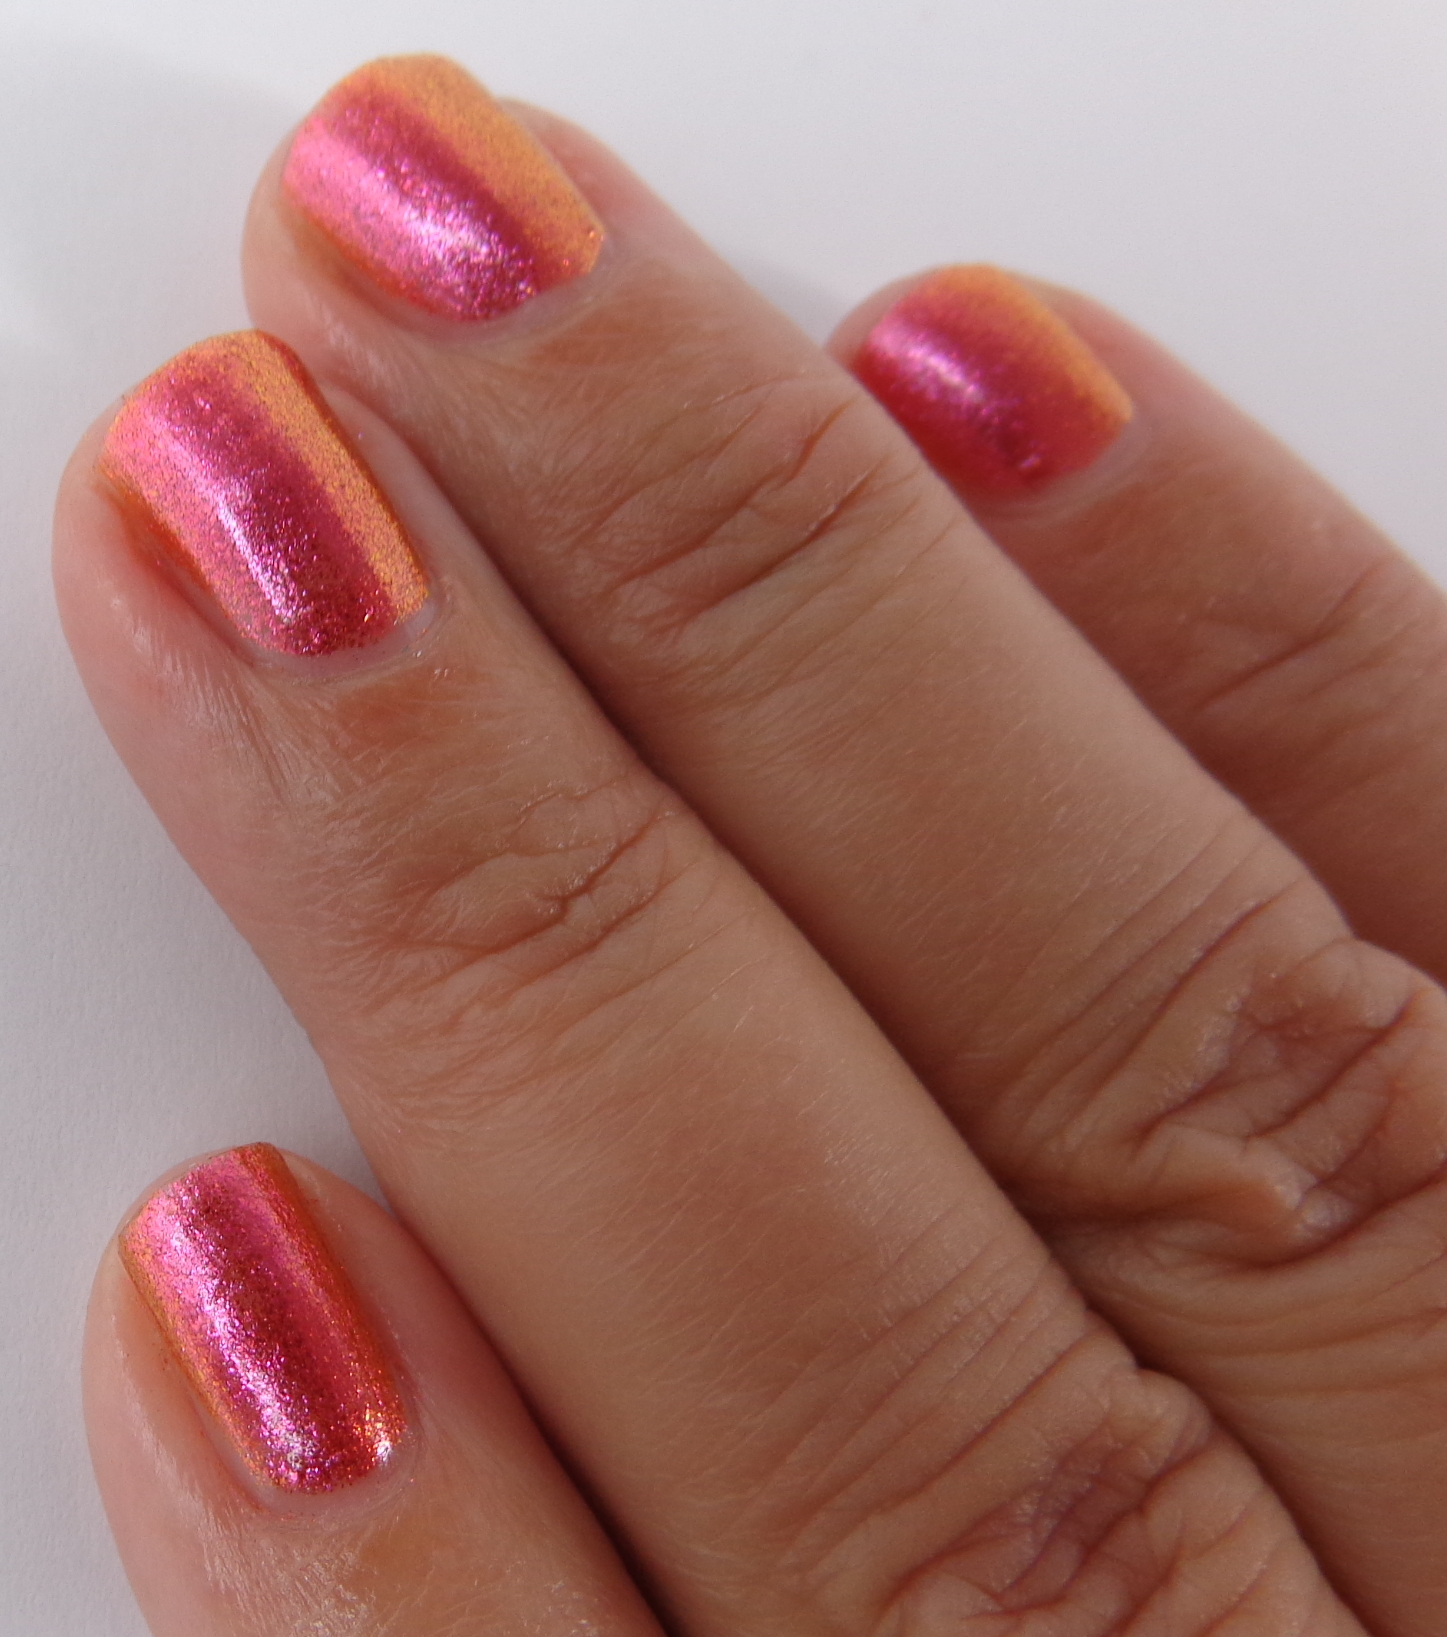 Swatch & Review: New! Sally Hansen Lustre Shine Nail Color - Lava - My  Highest Self